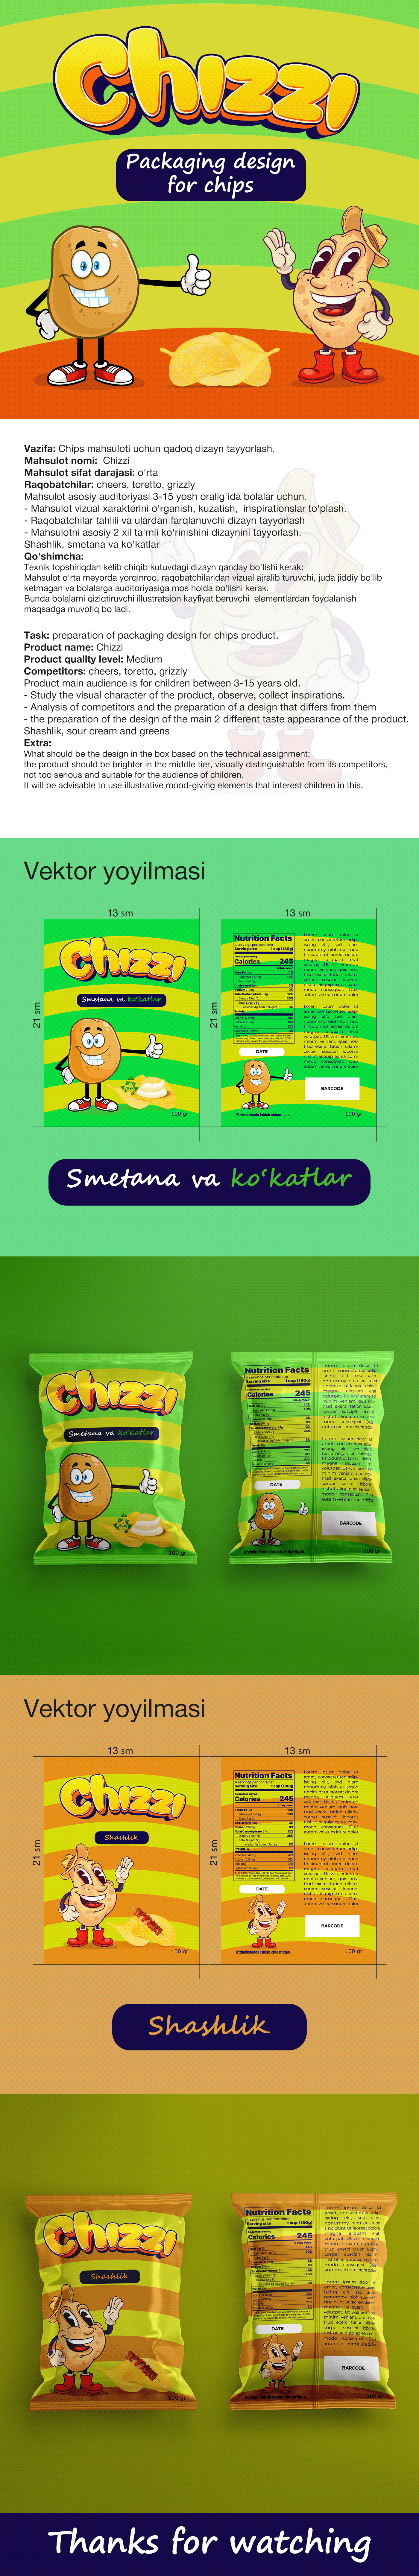 Packaging product design  Advertising  CHIPS PACKAGING  chips